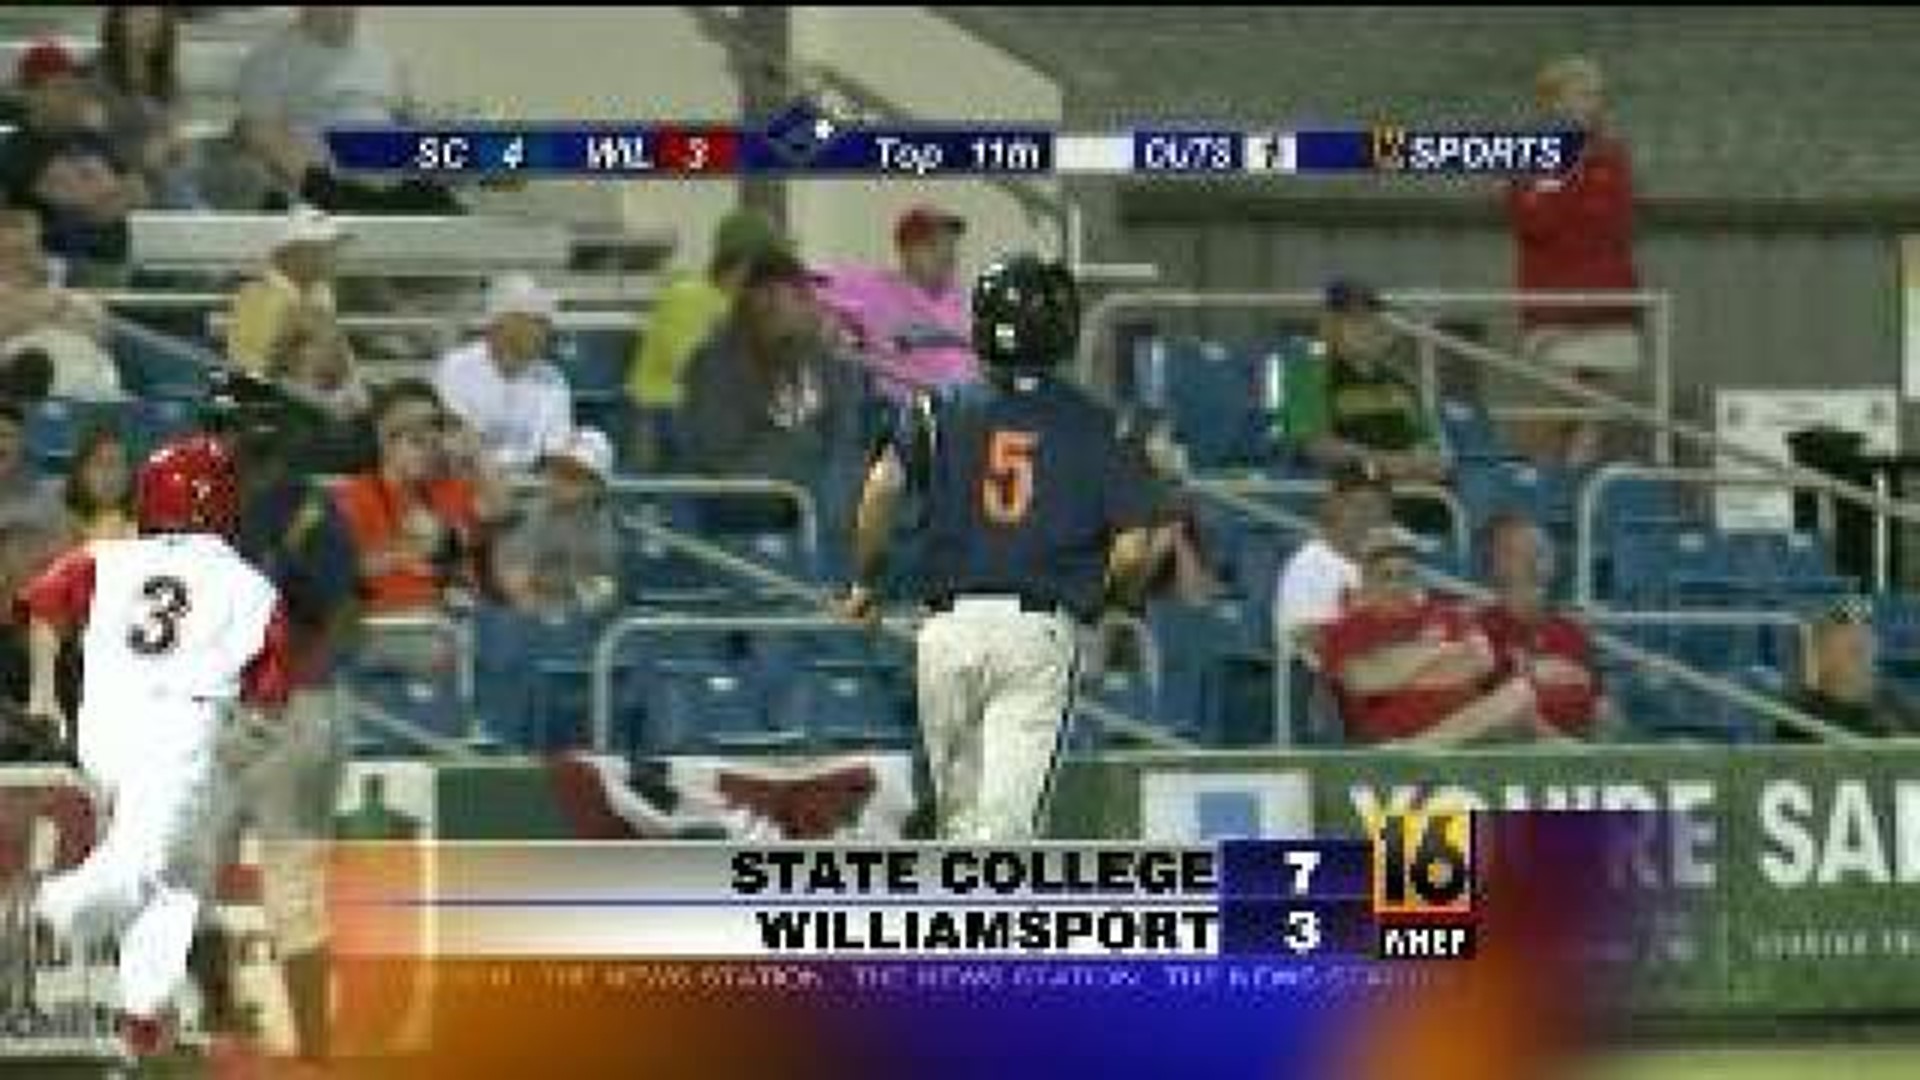 State College 7 Crosscutters 3 Final in 11 innings